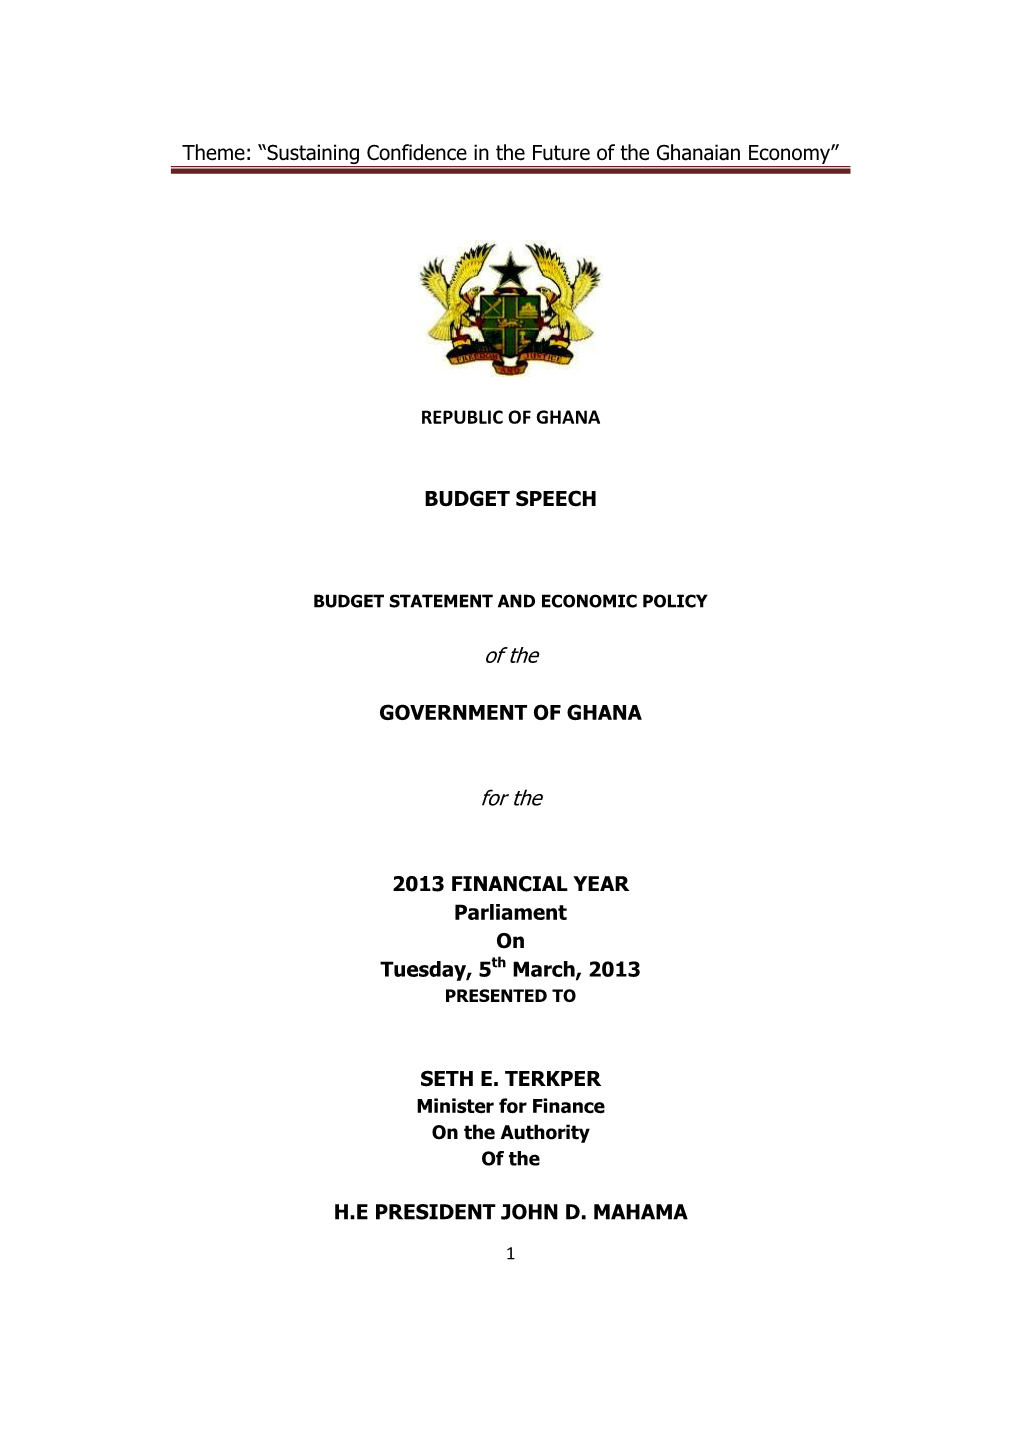 Theme: “Sustaining Confidence in the Future of the Ghanaian Economy”